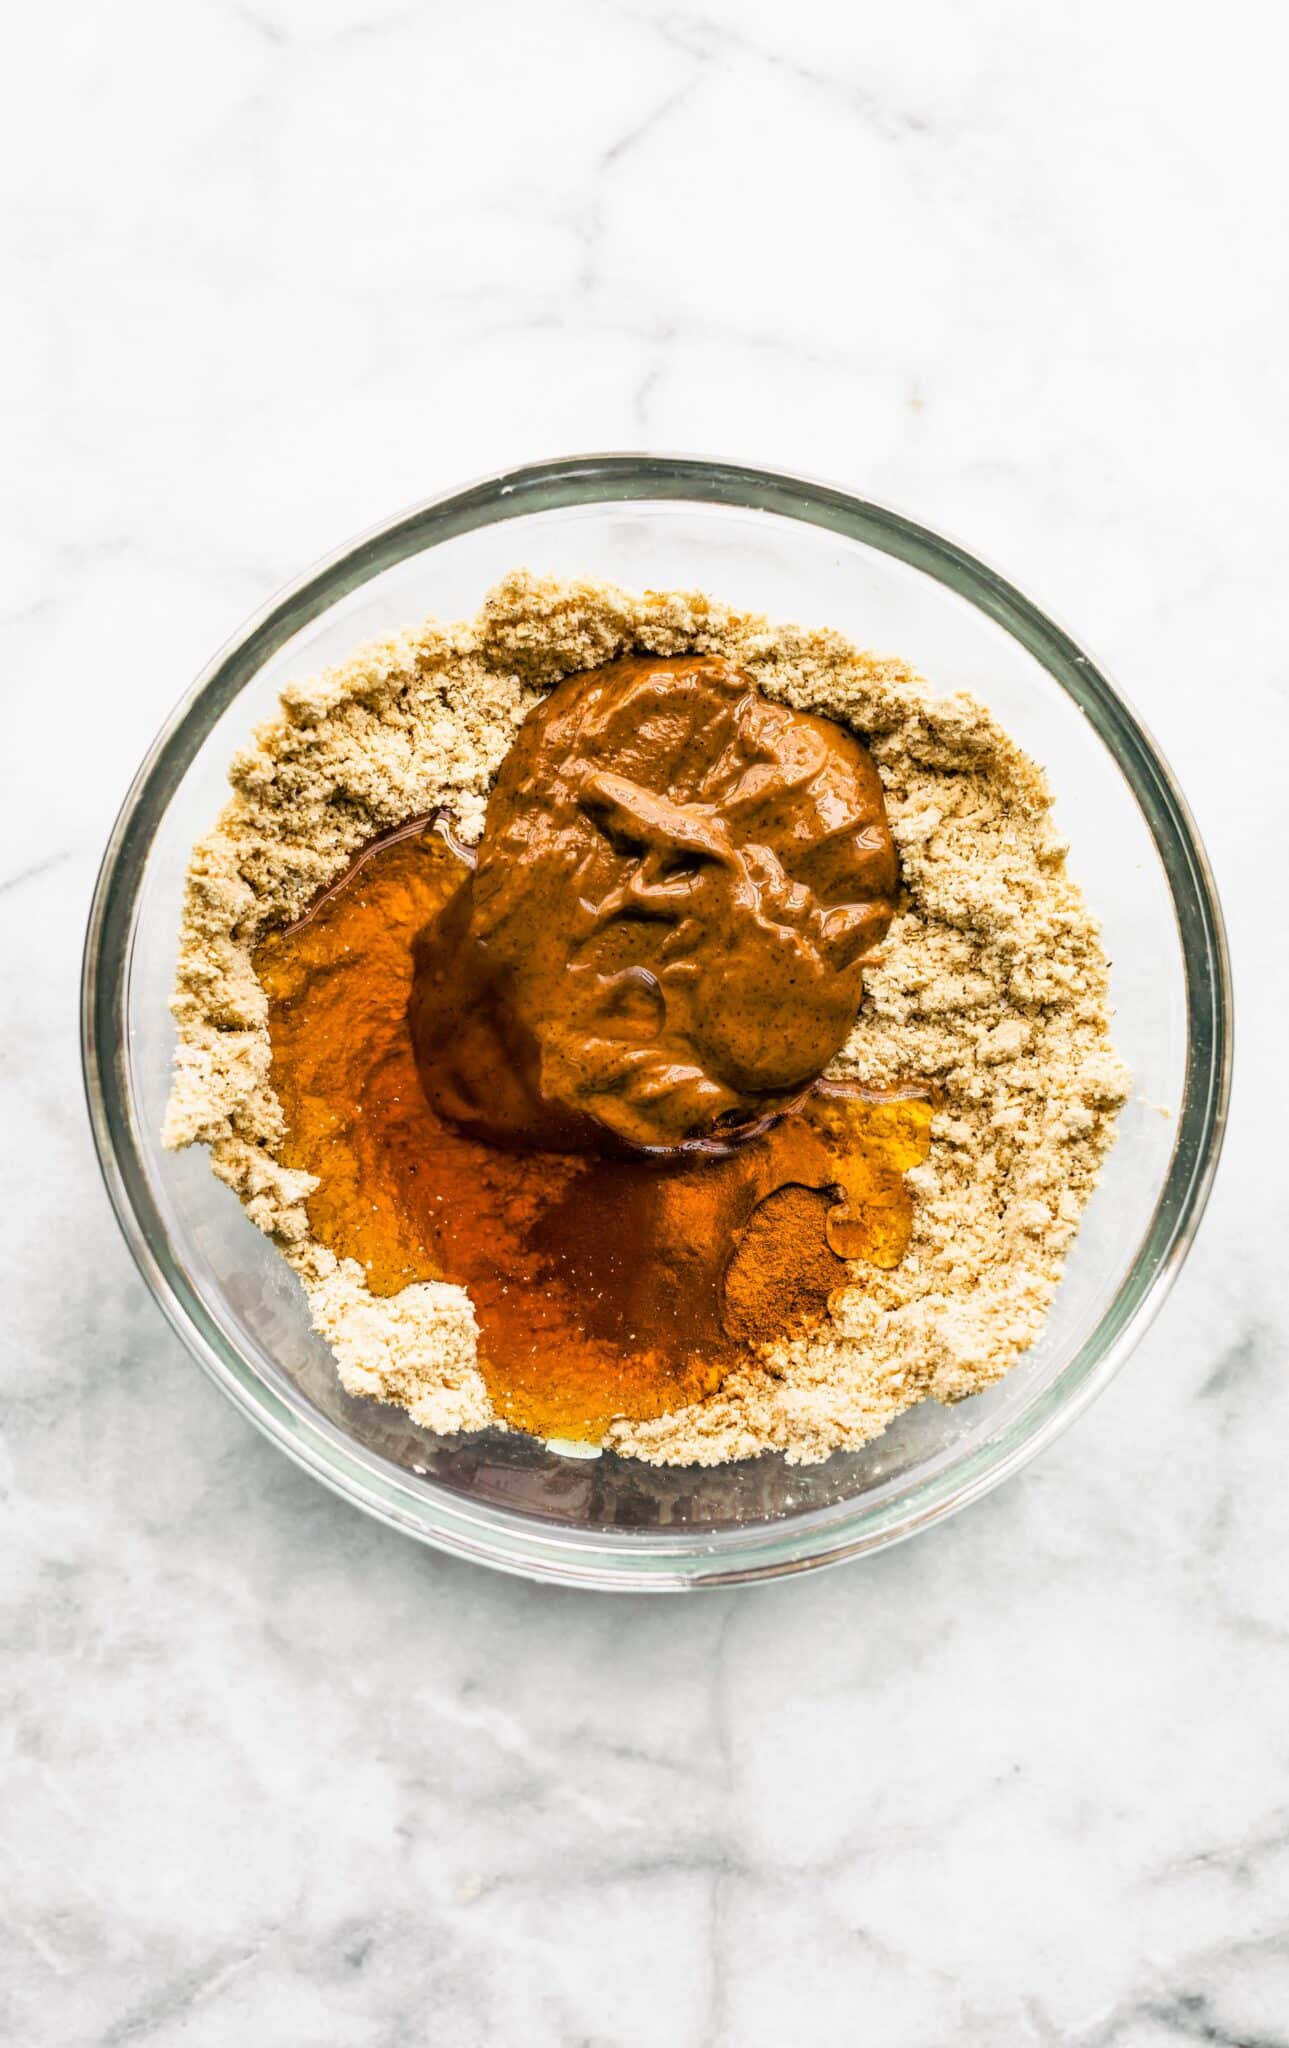 Protein powder, almond butter, and maple syrup in a glass bowl.